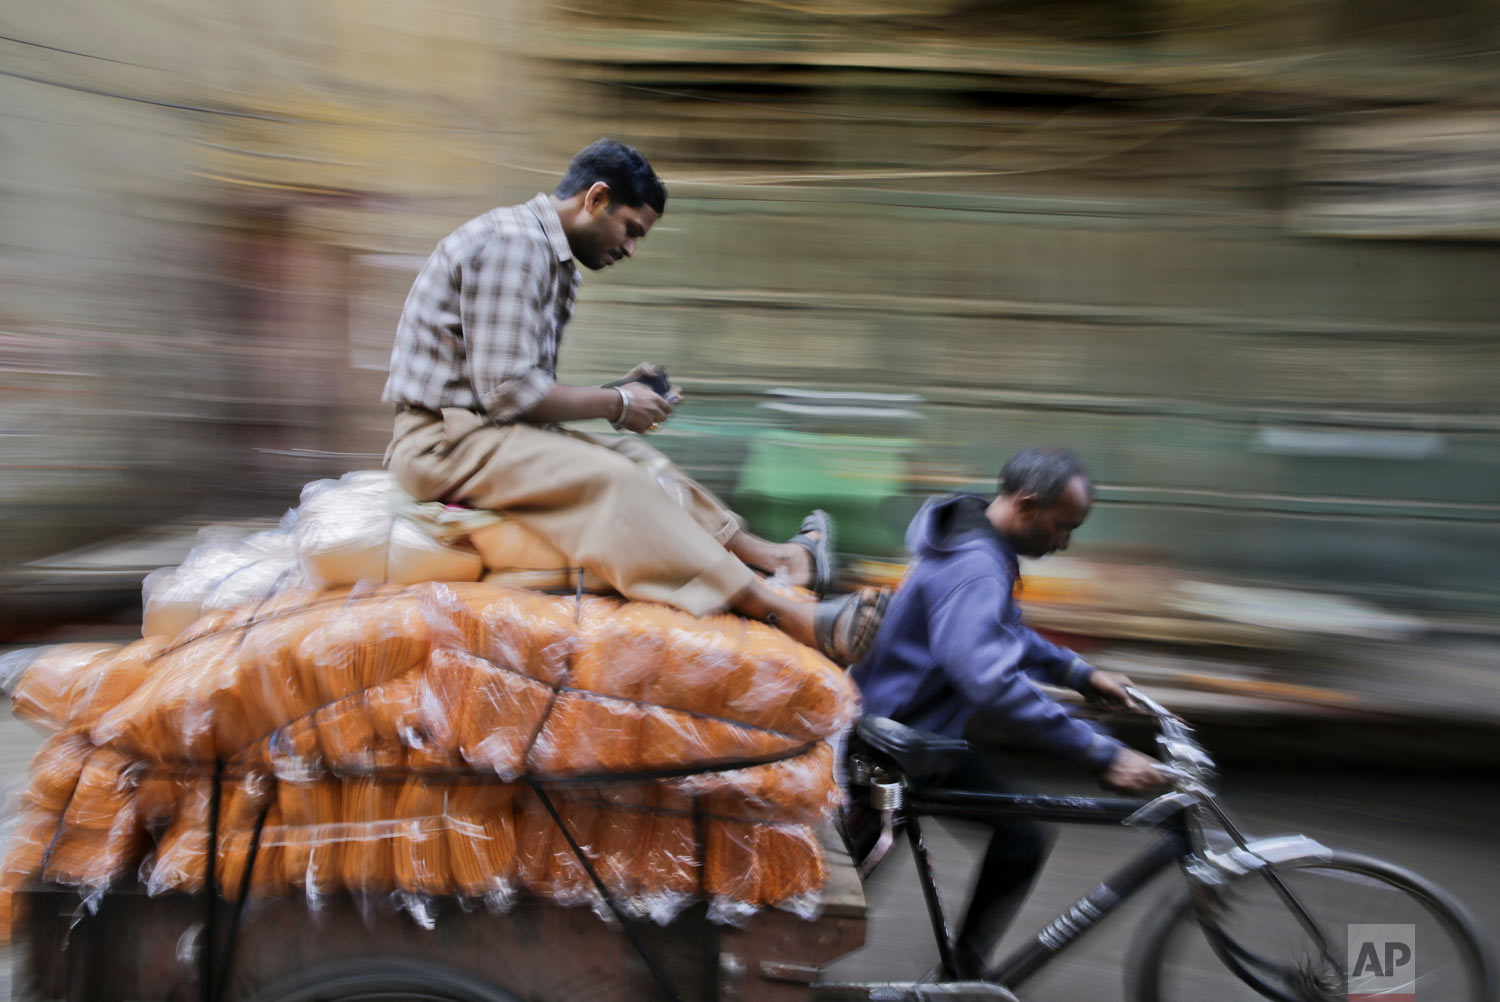  A man sits on stacks of towels transported on a cycle rickshaw cart through a market in the old part of New Delhi, India, Saturday, Dec. 1, 2018. Despite being extremely crowded and dilapidated, the older part of the city still serves as its symboli